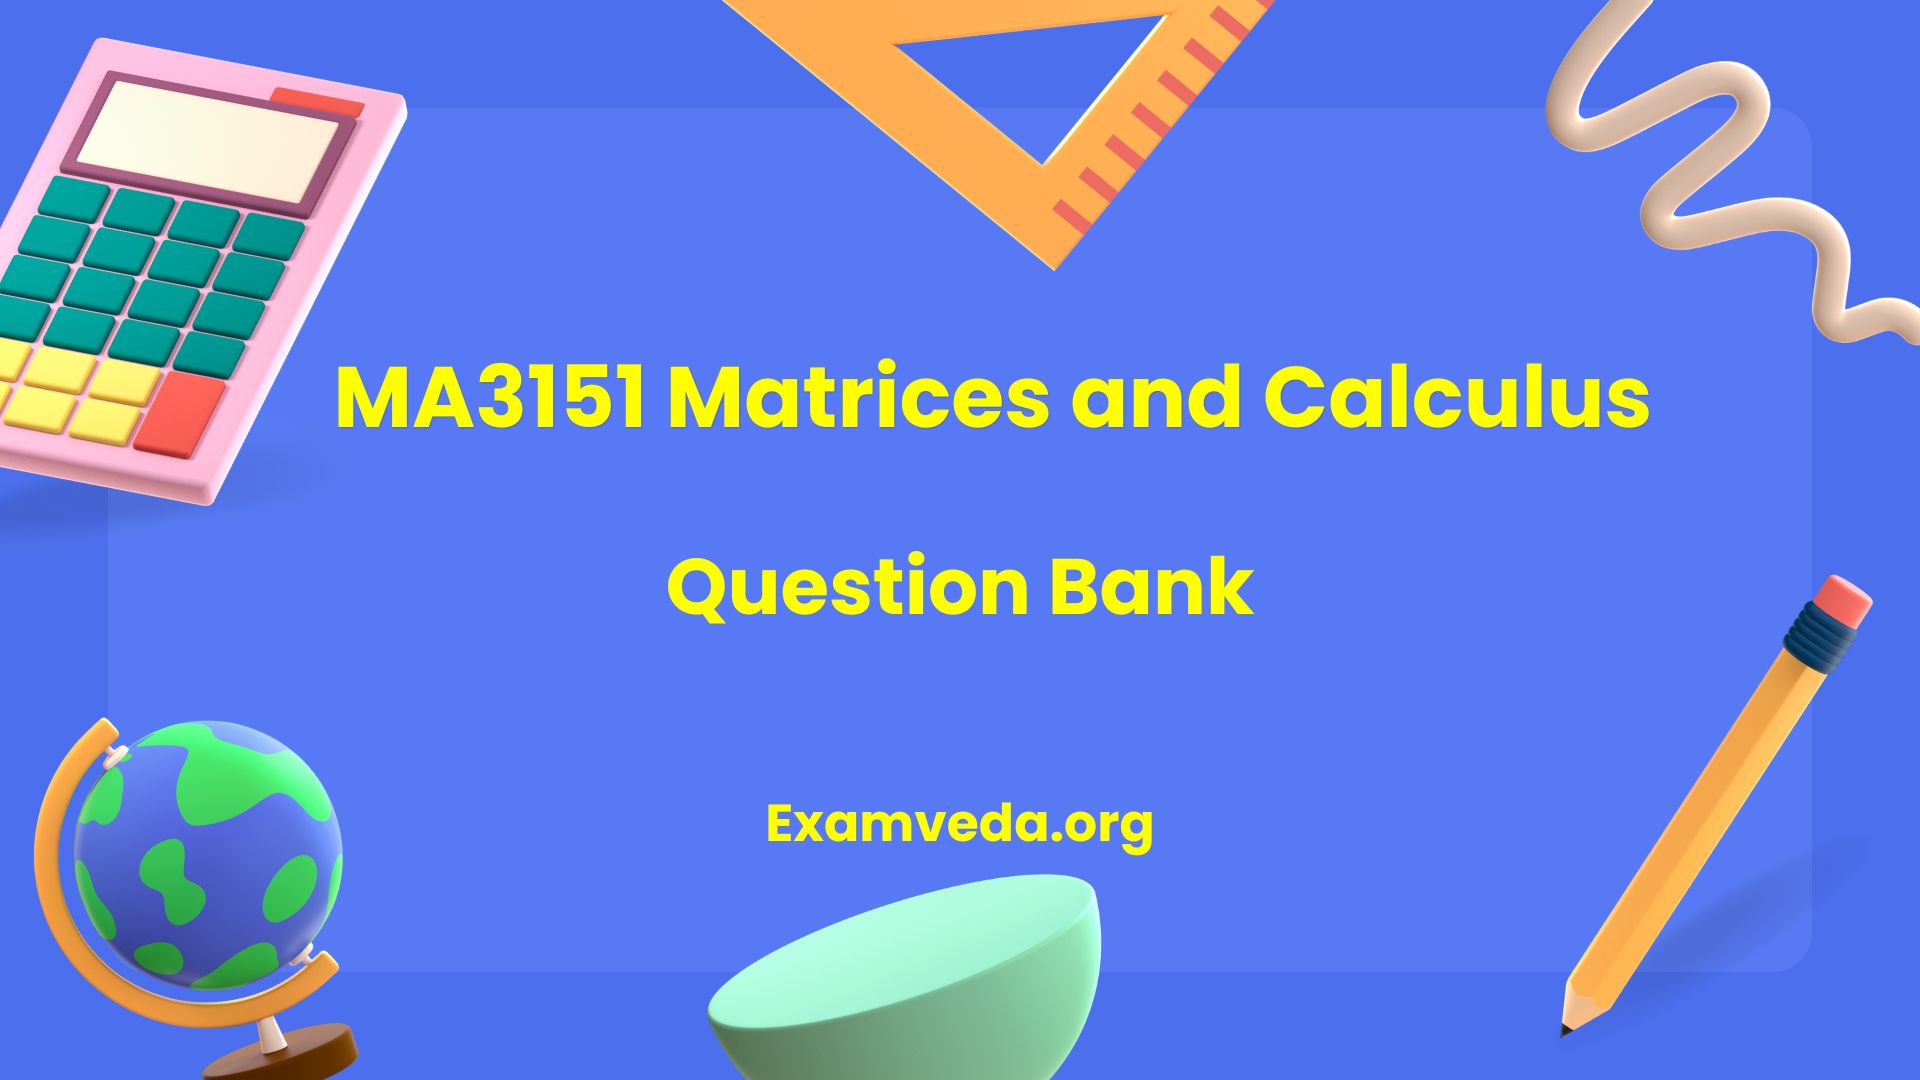 MA3151 Matrices and Calculus Question Bank